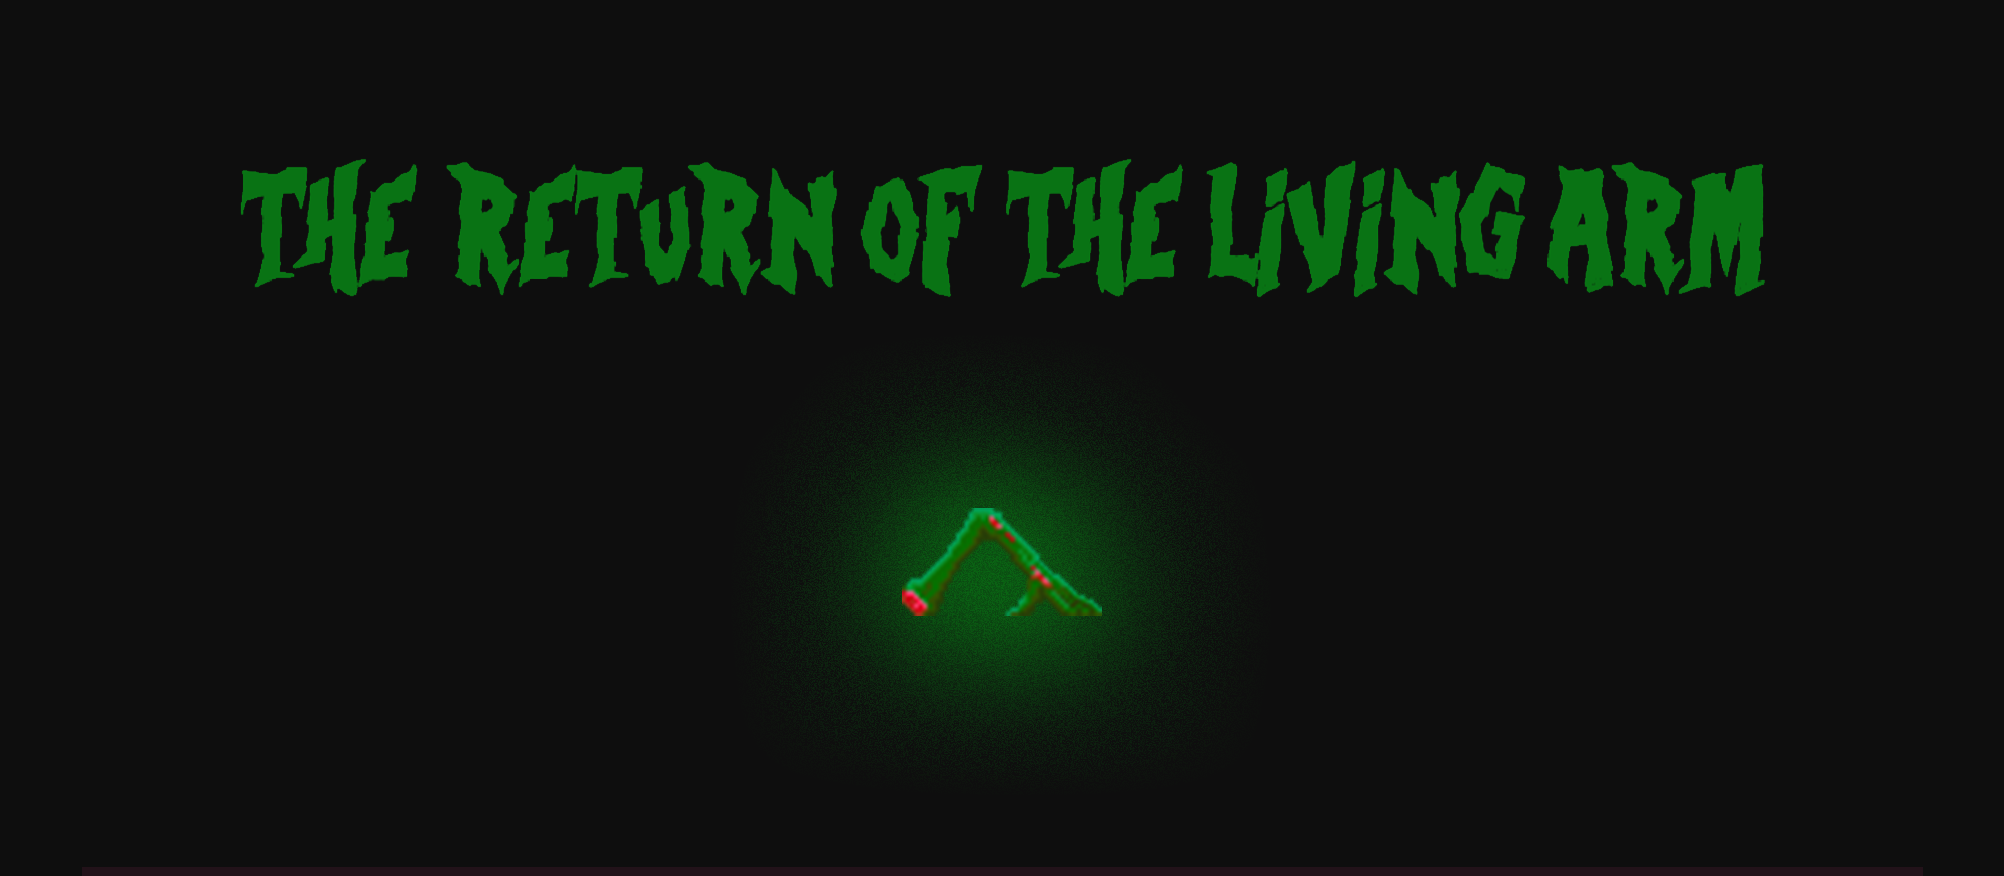 The Return of the Living Arm